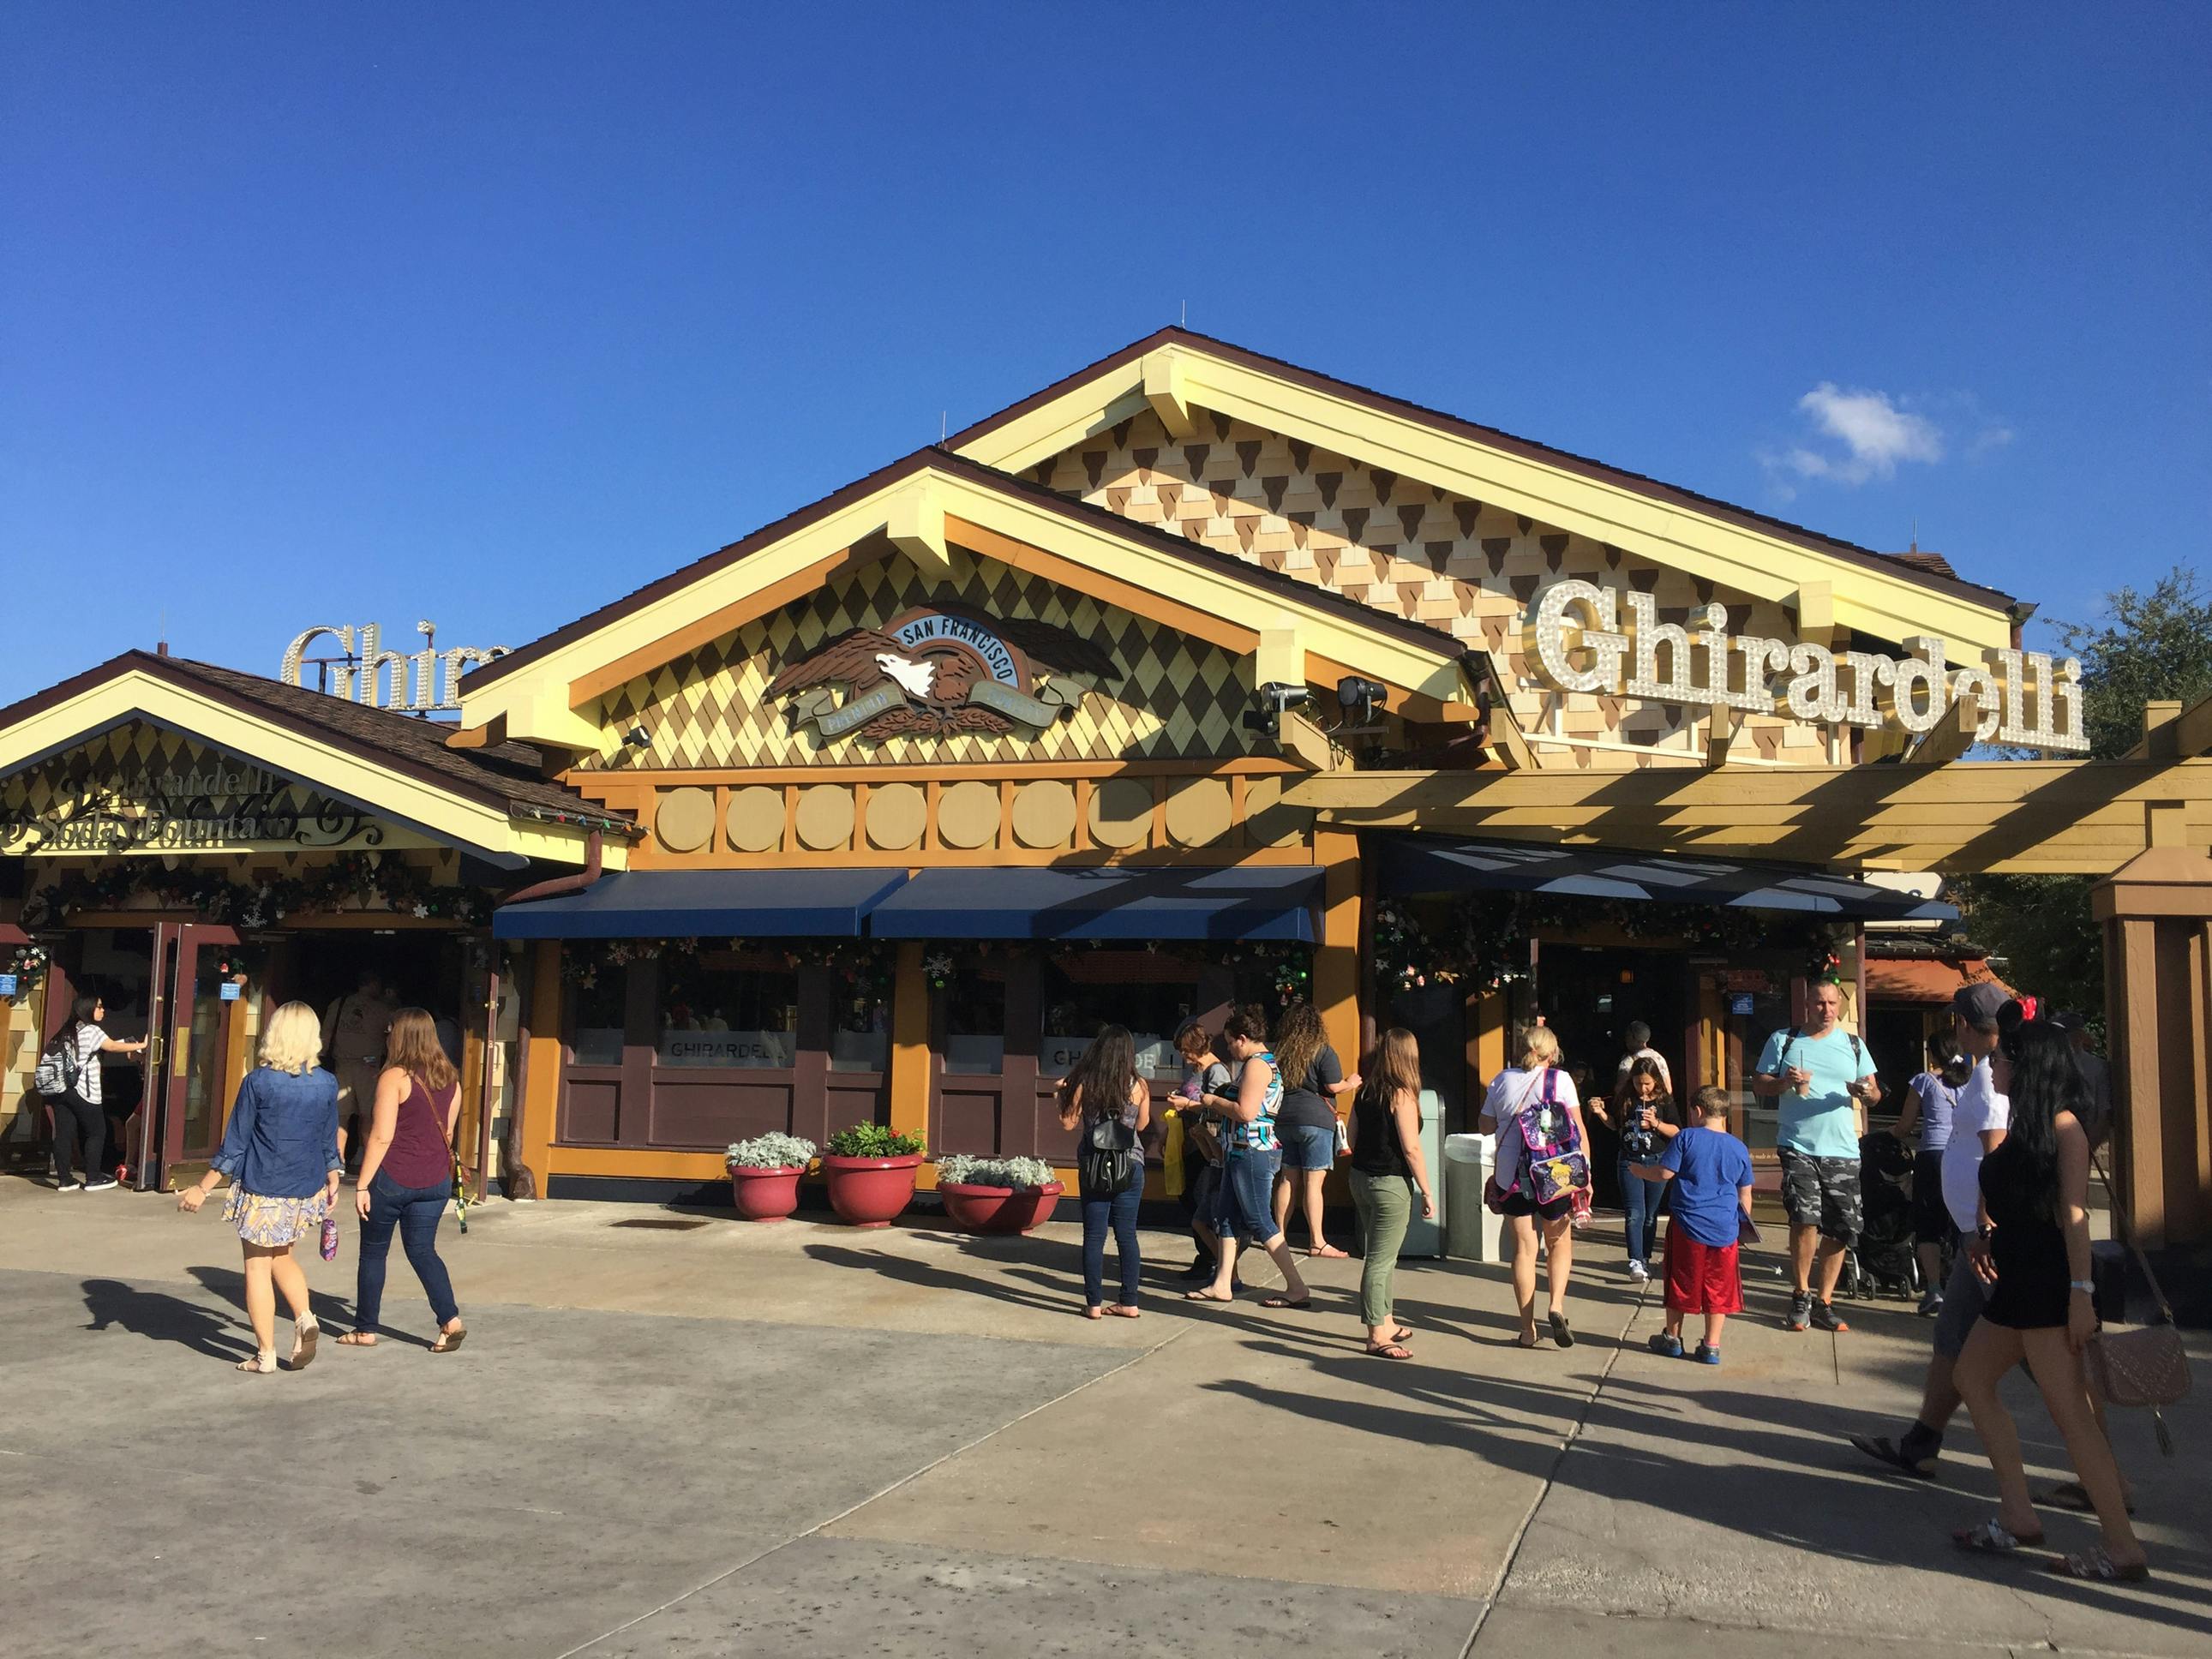 The front of the Ghirardelli chocolate shop at Disney Springs.